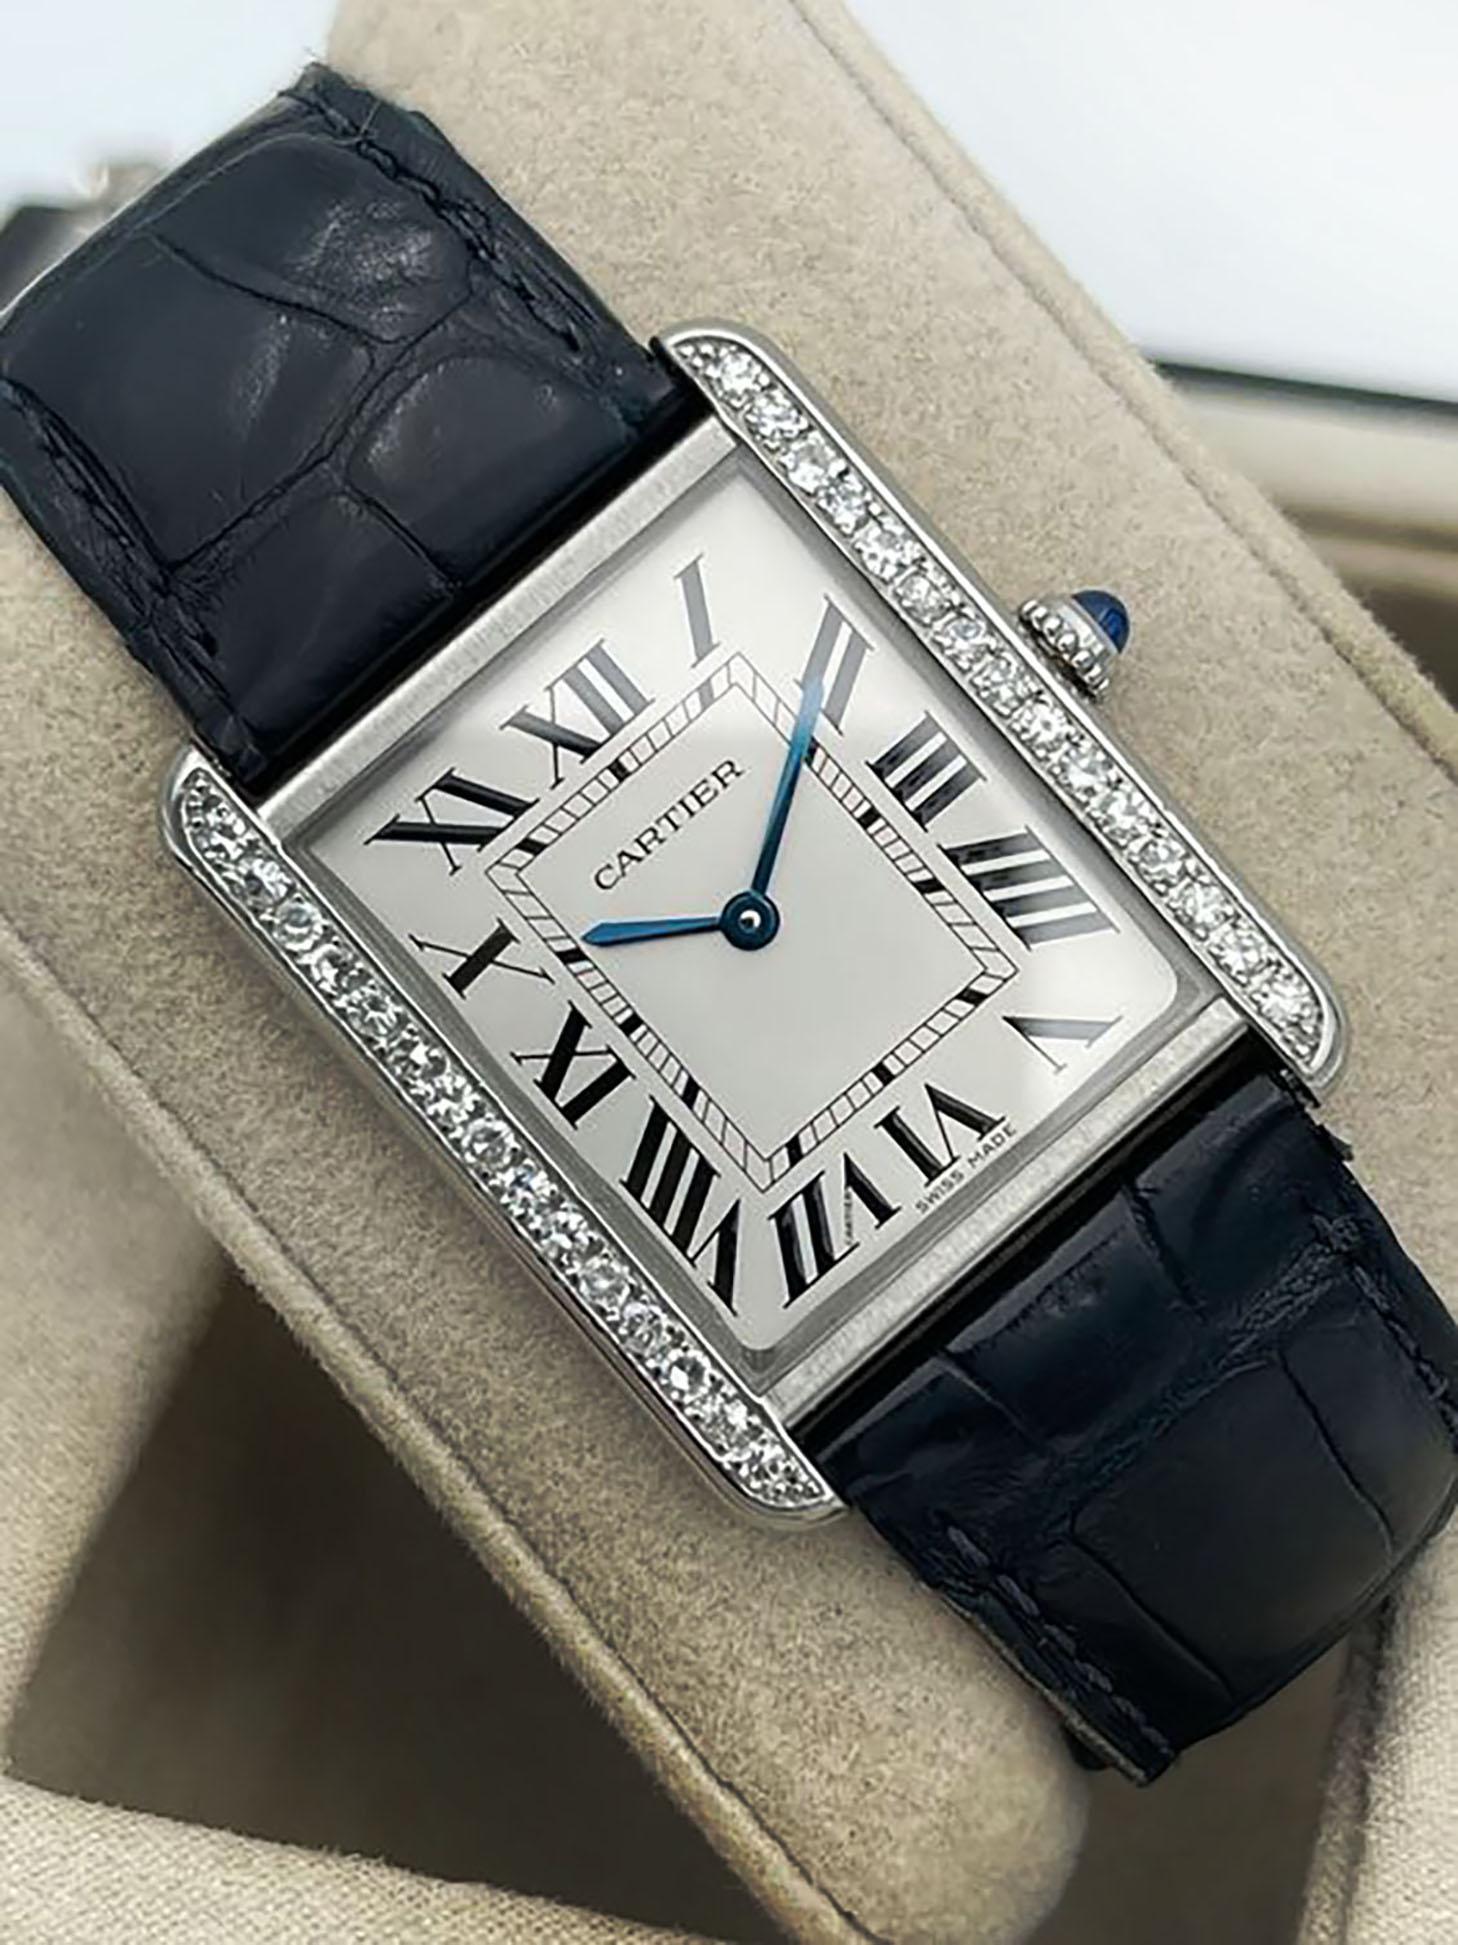 CARTIER Solo Tank Watch
Supplied with its carrying case
Black crocodile strap.
CIRCA 2011
WATER RESISTANT
Steel, diamonds, quartz and sapphire crown.
Cartier buckle, white dial with Roman numerals.
Length: 27mm